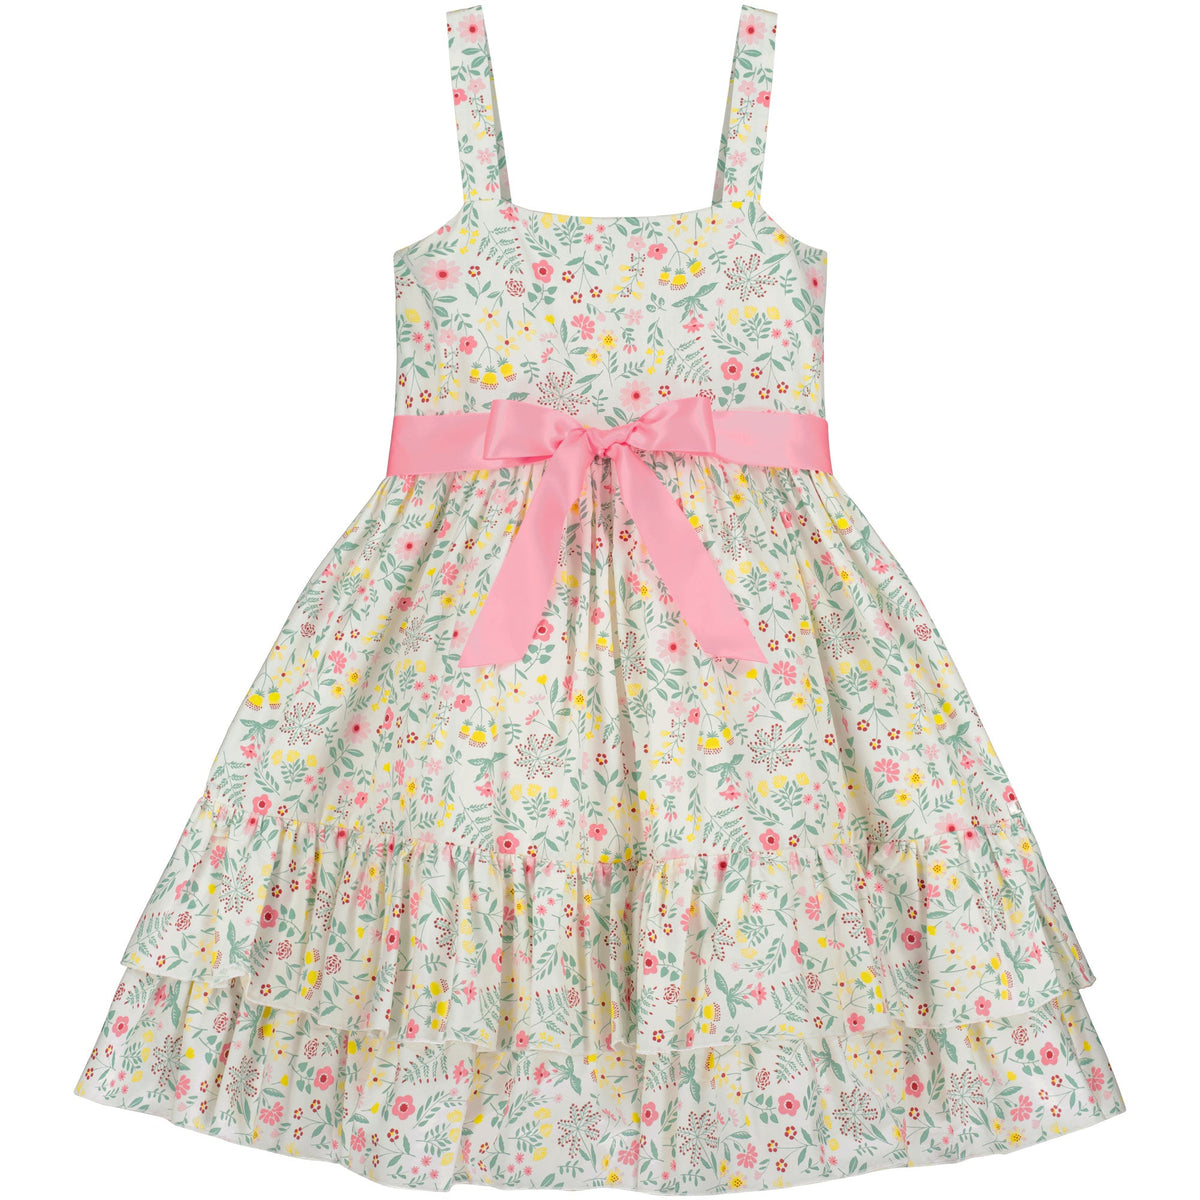 Summer Meadow Girls Party Dress, Pink & White | Holly Hastie London